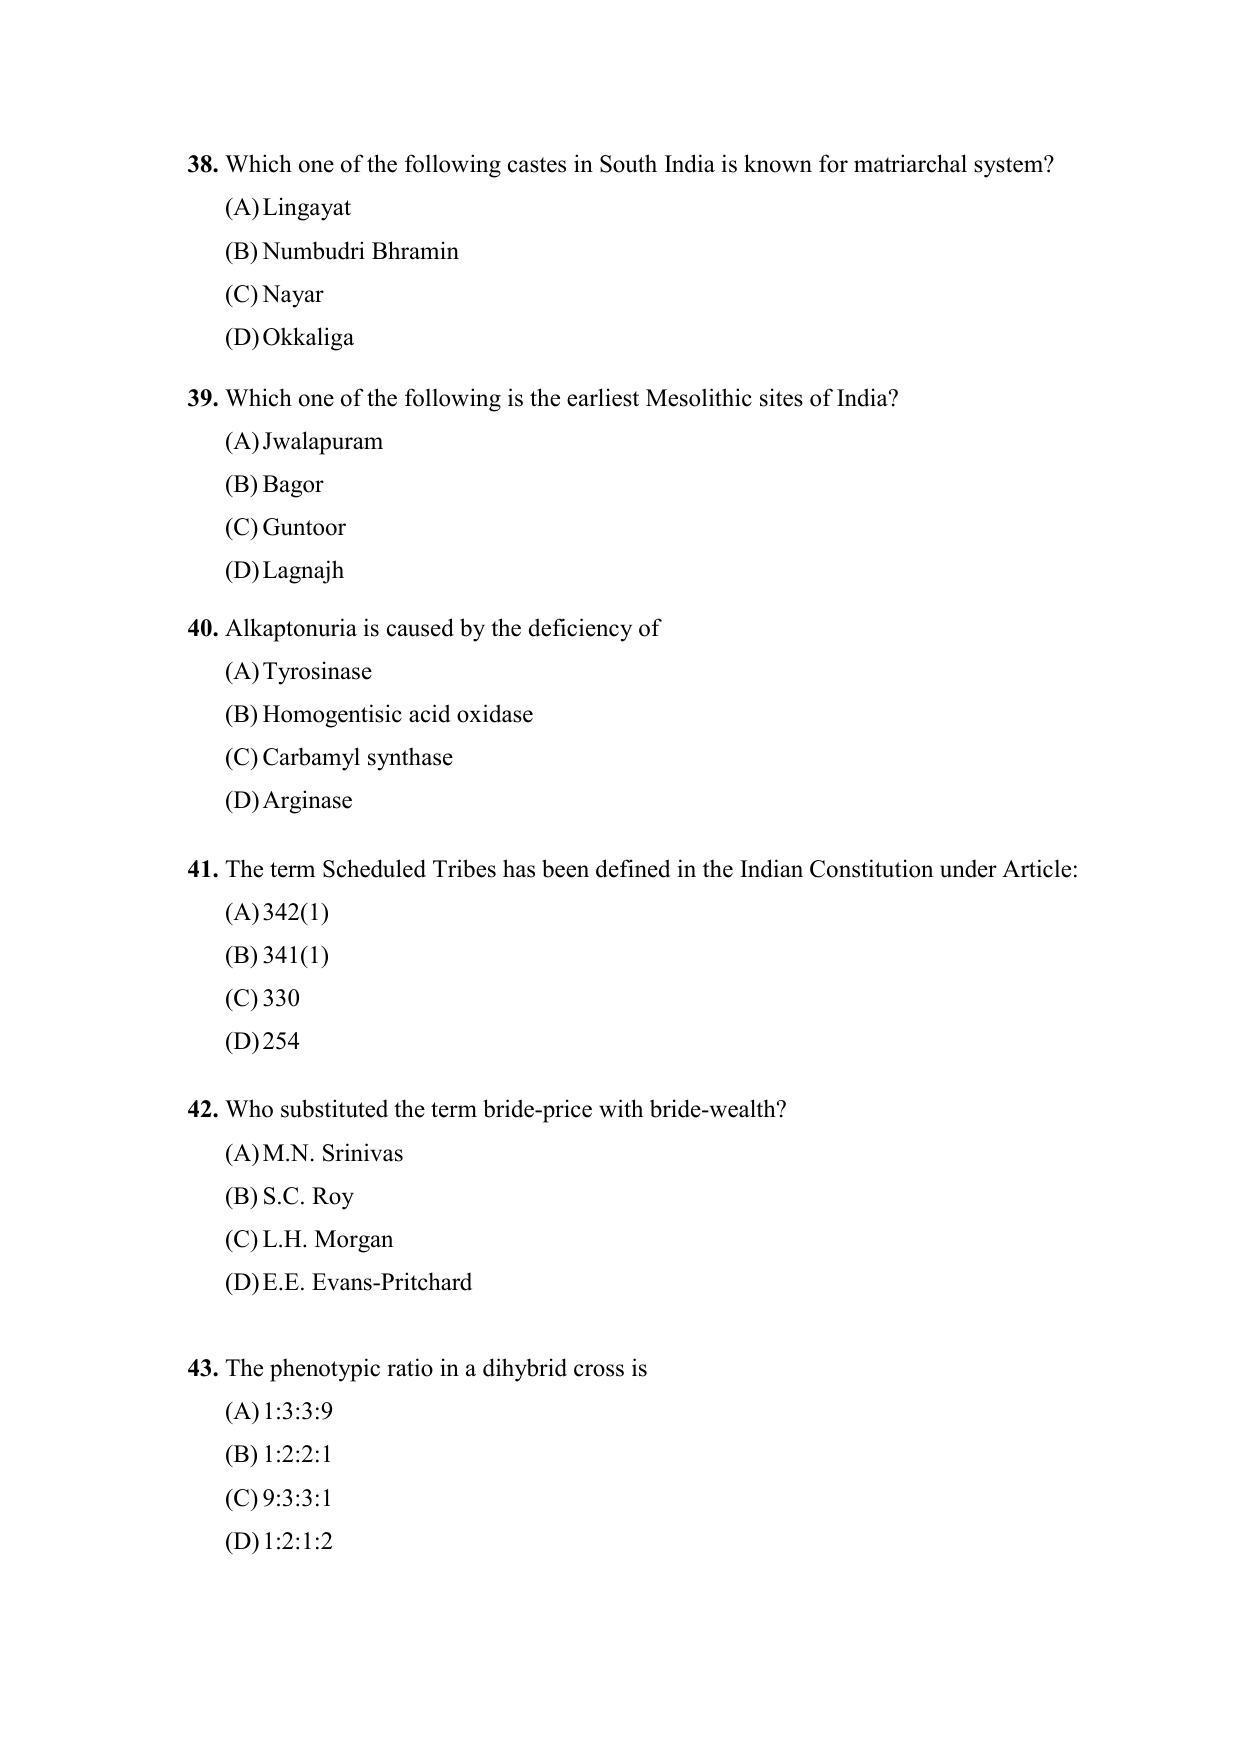 PU MPET Anthropology 2022 Question Papers - Page 8